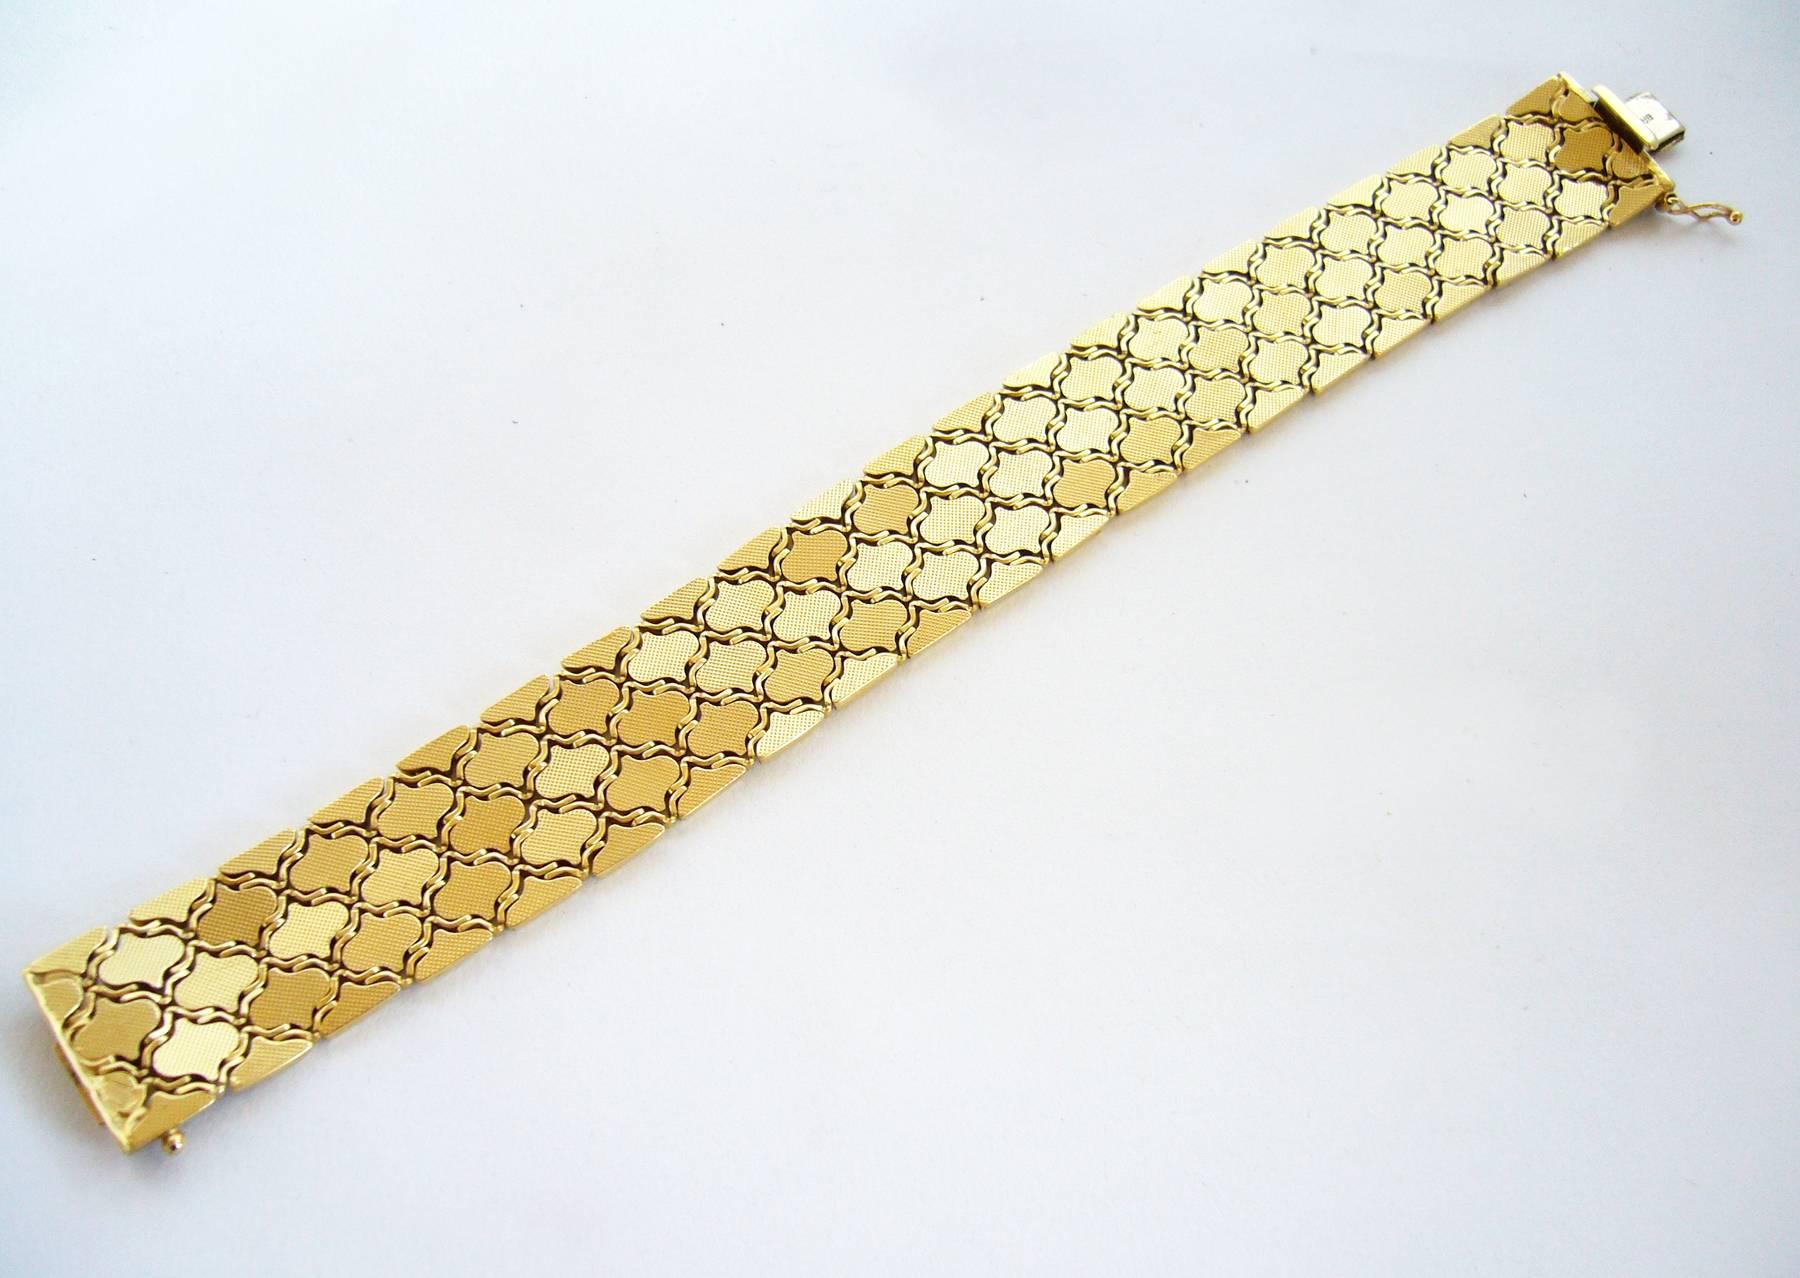 An 18k florentined gold mesh bracelet by Uno a Erre of Italy, circa 1960's.  Bracelet measures 7.5